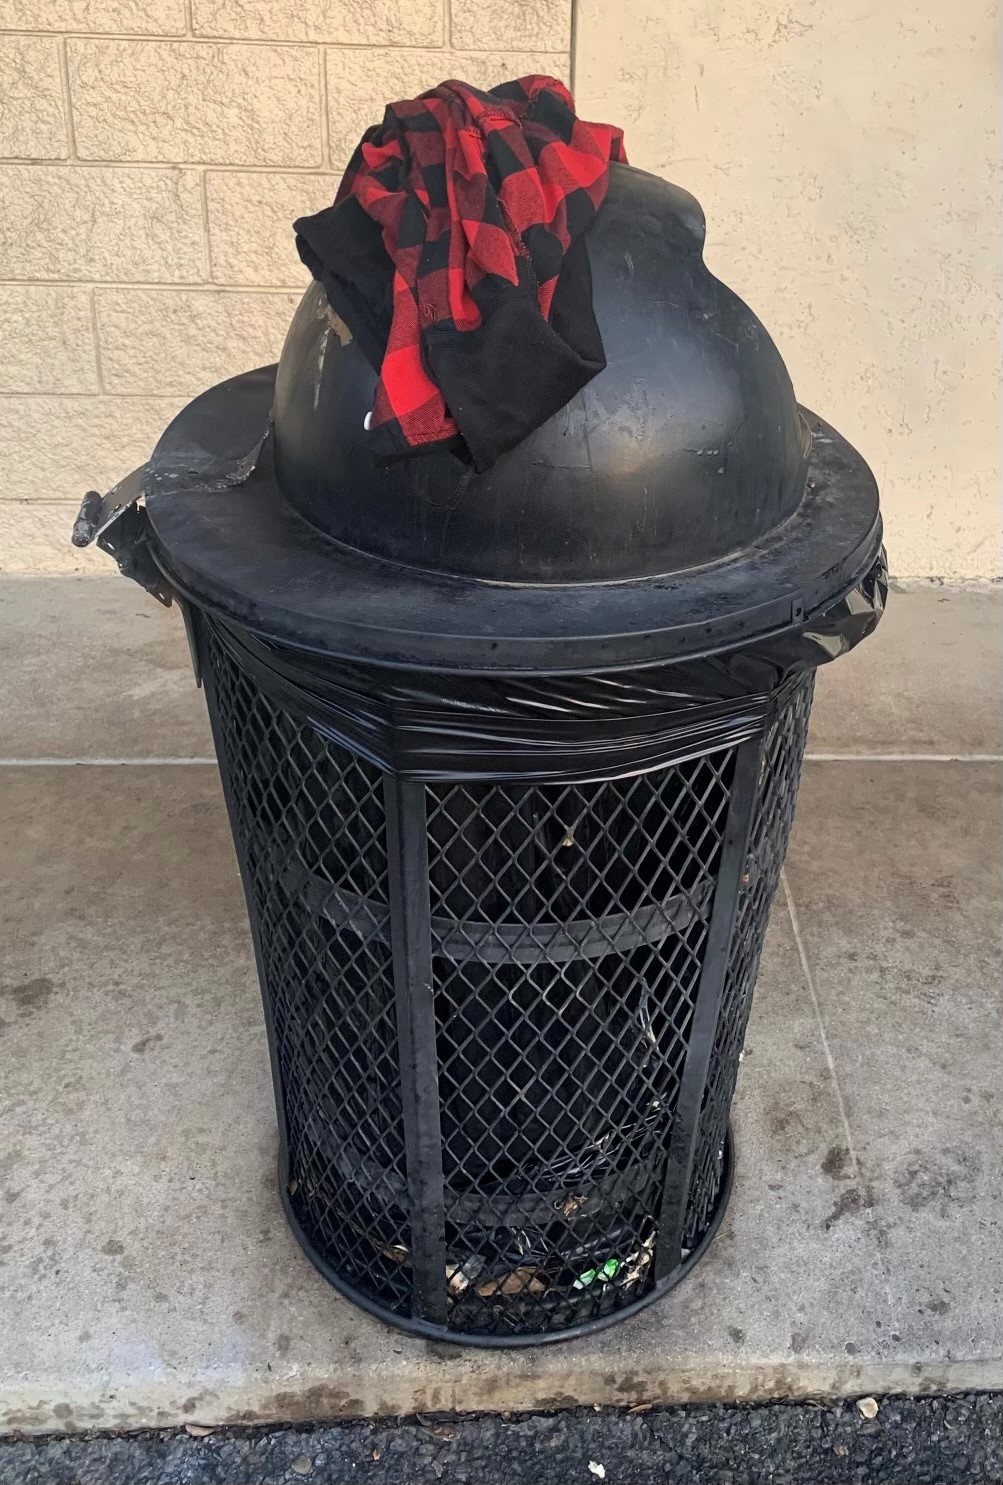 Suspect Clothing on Trash Can